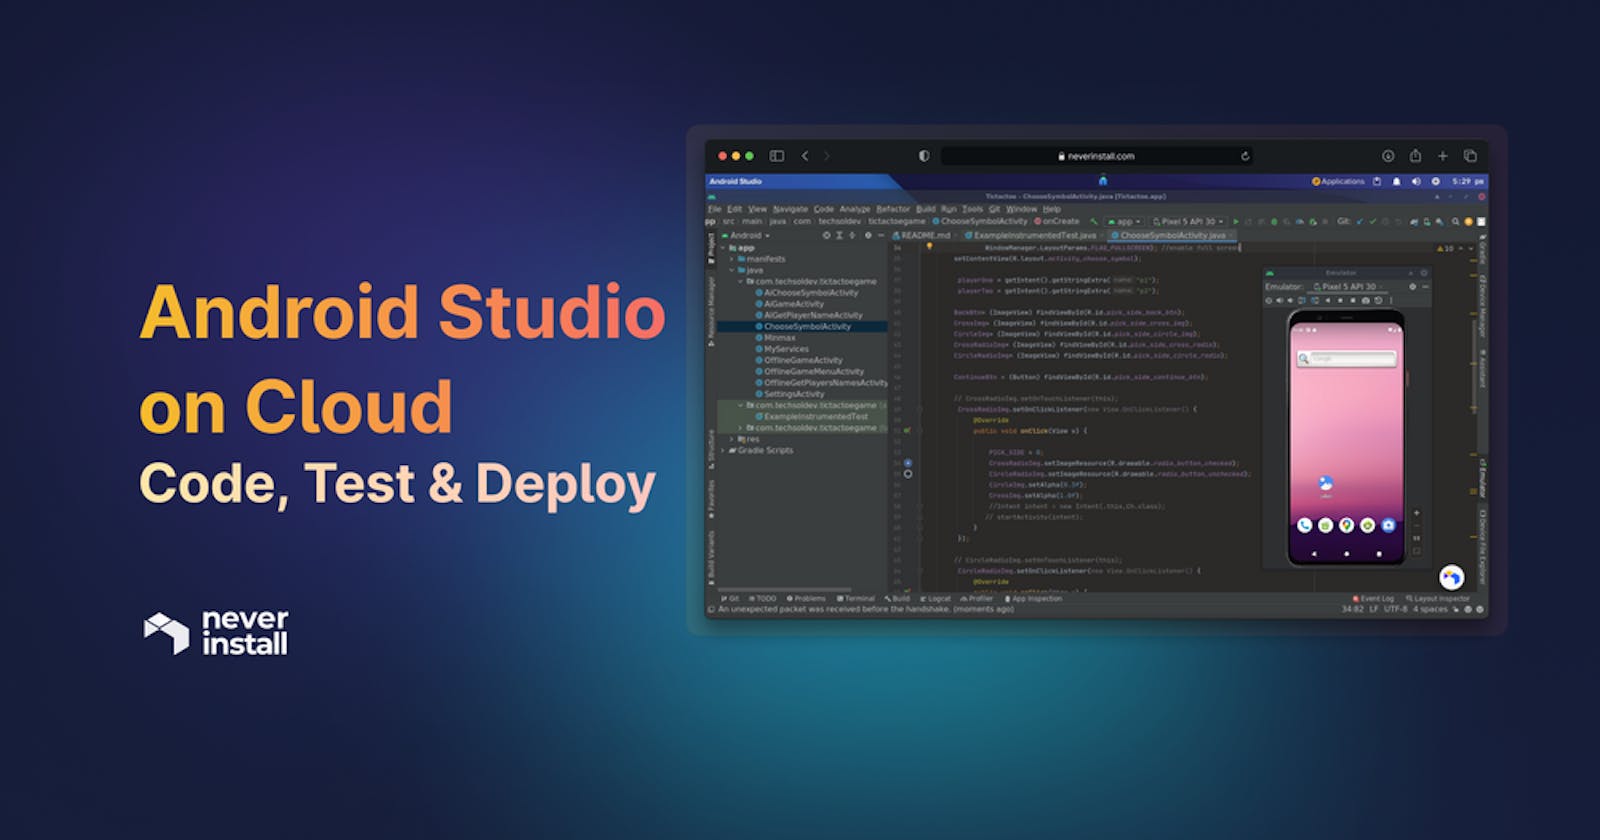 Android Studio on Cloud: Code, Test & Deploy